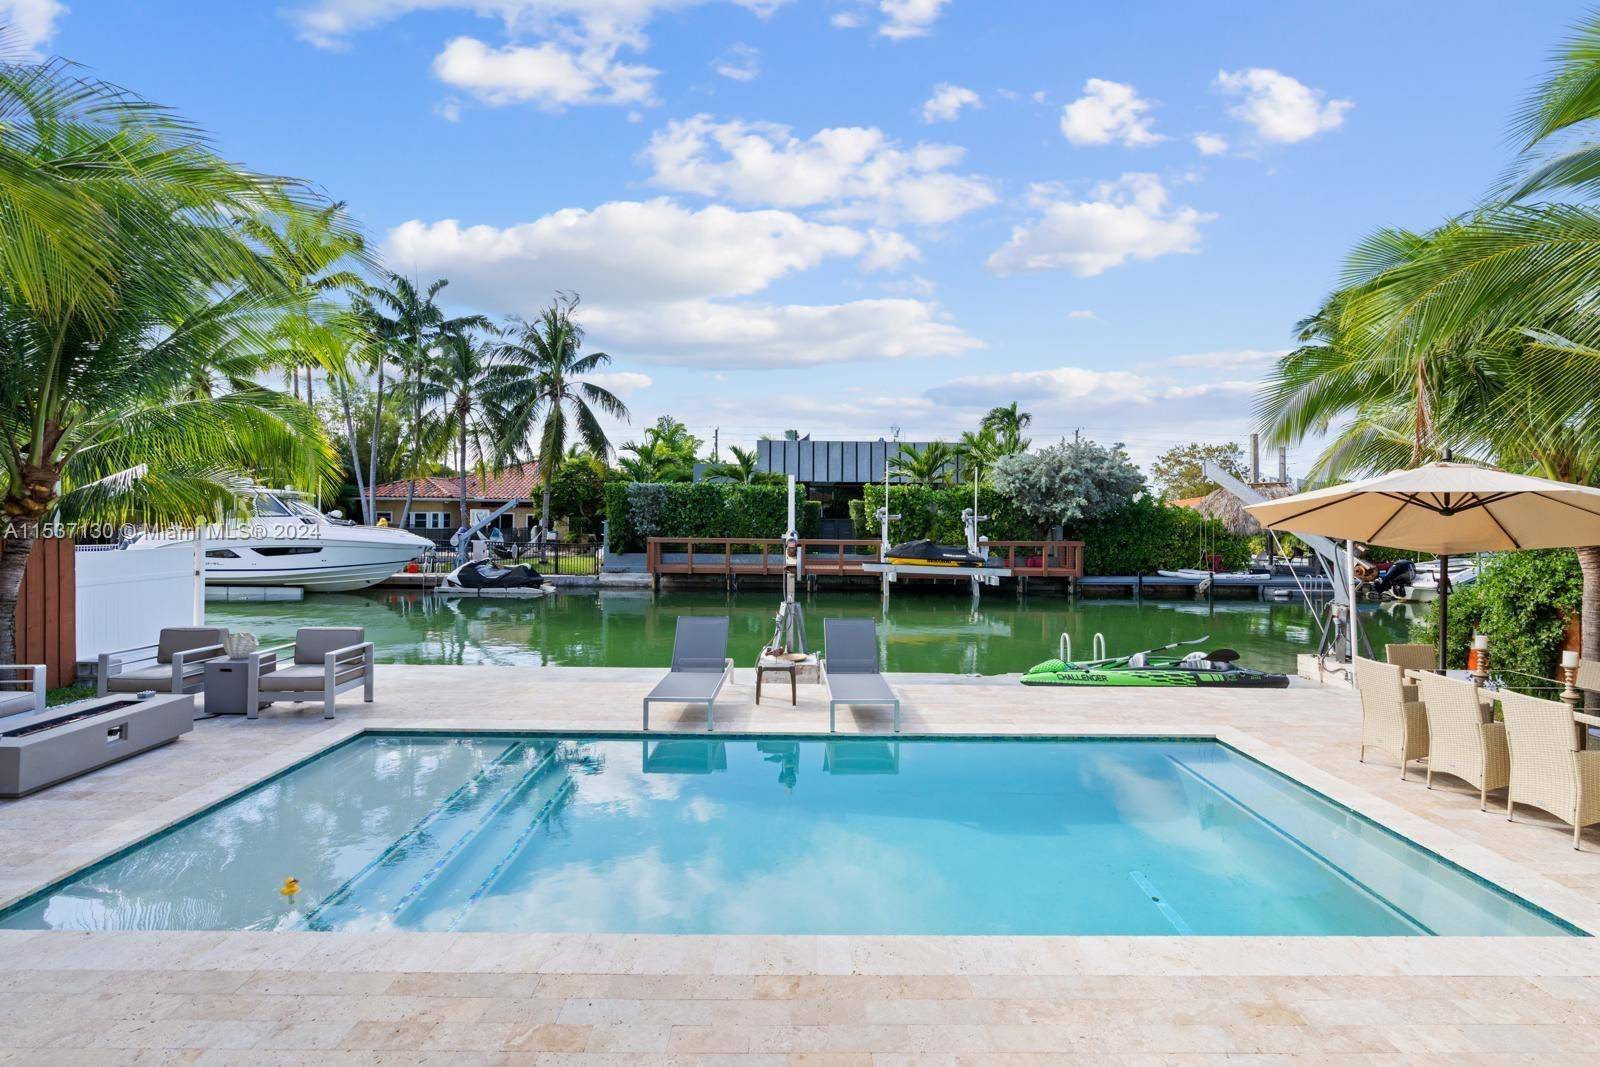 Flexible rental terms ! Beautiful house in the heart of Miami Beach, 4 Bedrooms 3 Bathrooms Open floor plan with amazing water views from the living area, lots of natural ...